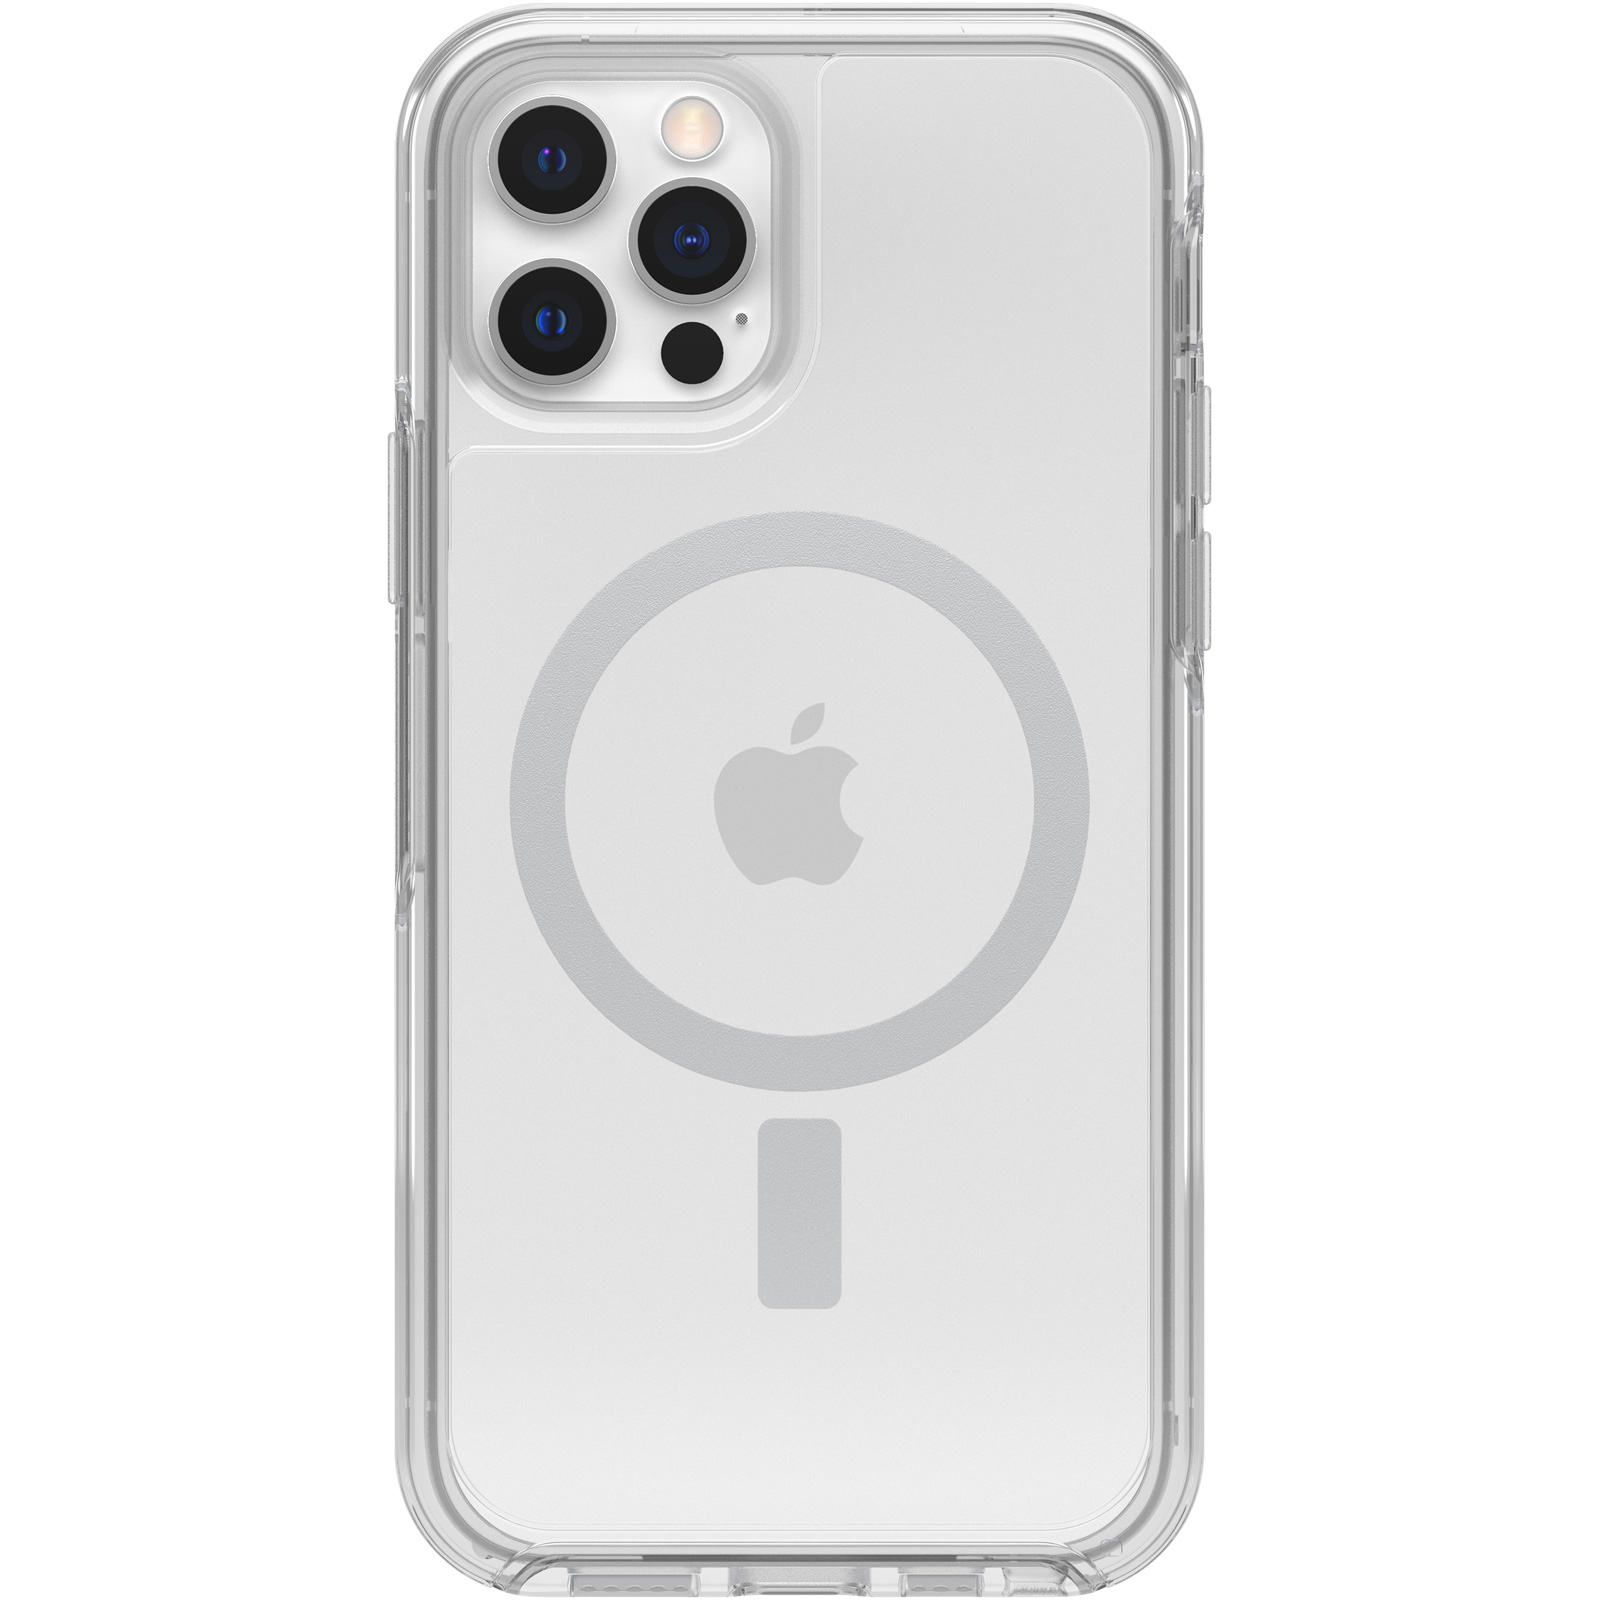 https://www.otterbox.com/on/demandware.static/-/Sites-masterCatalog/default/dw3da612fa/productimages/dis/cases-screen-protection/apl227-iph20/apl227-iph20-clear-1.jpg